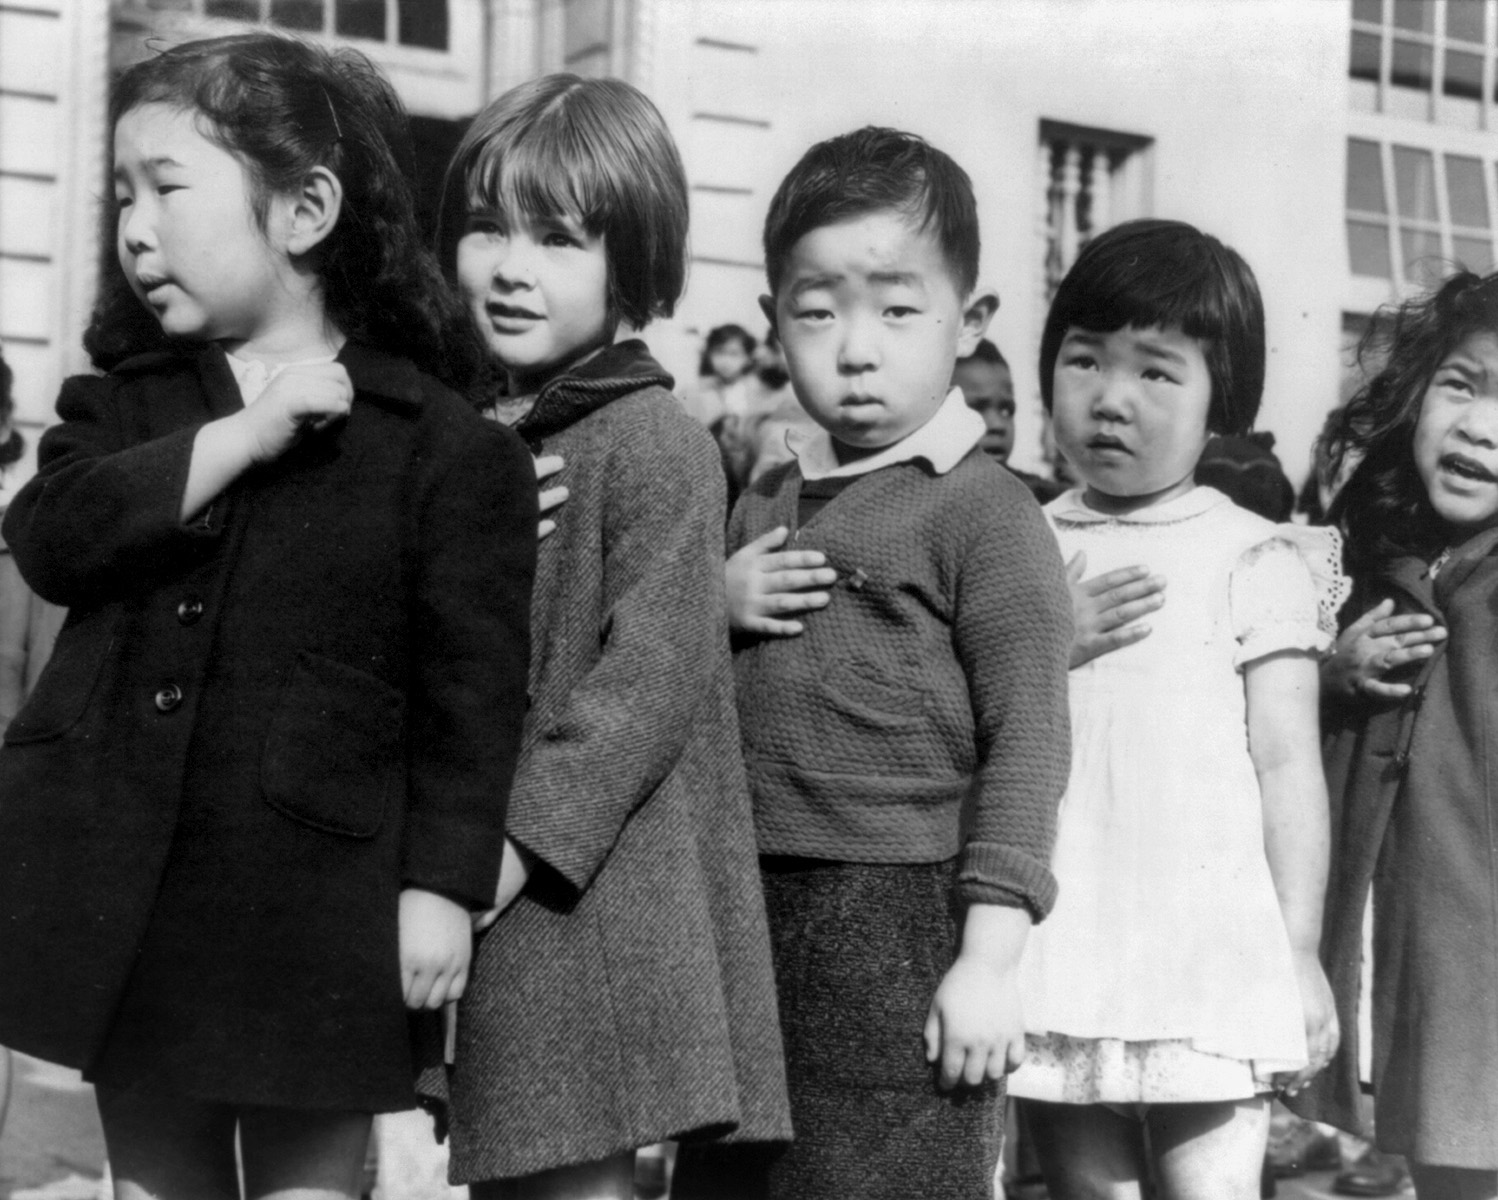 School children pledge allegiance to the American flag in San Francisco, US, in 1941. Within a year, the 3 Japanese American children in this picture (and any others in the school) would be removed and put in internment camps for most of the duration of the war. Up to 500,000 Japanese Americans were put in camps by US officials, regardless of what generation of Japanese American they were or even if they were US citizens. If you had a Japanese background, you most likely found yourself in a camp during WWII.